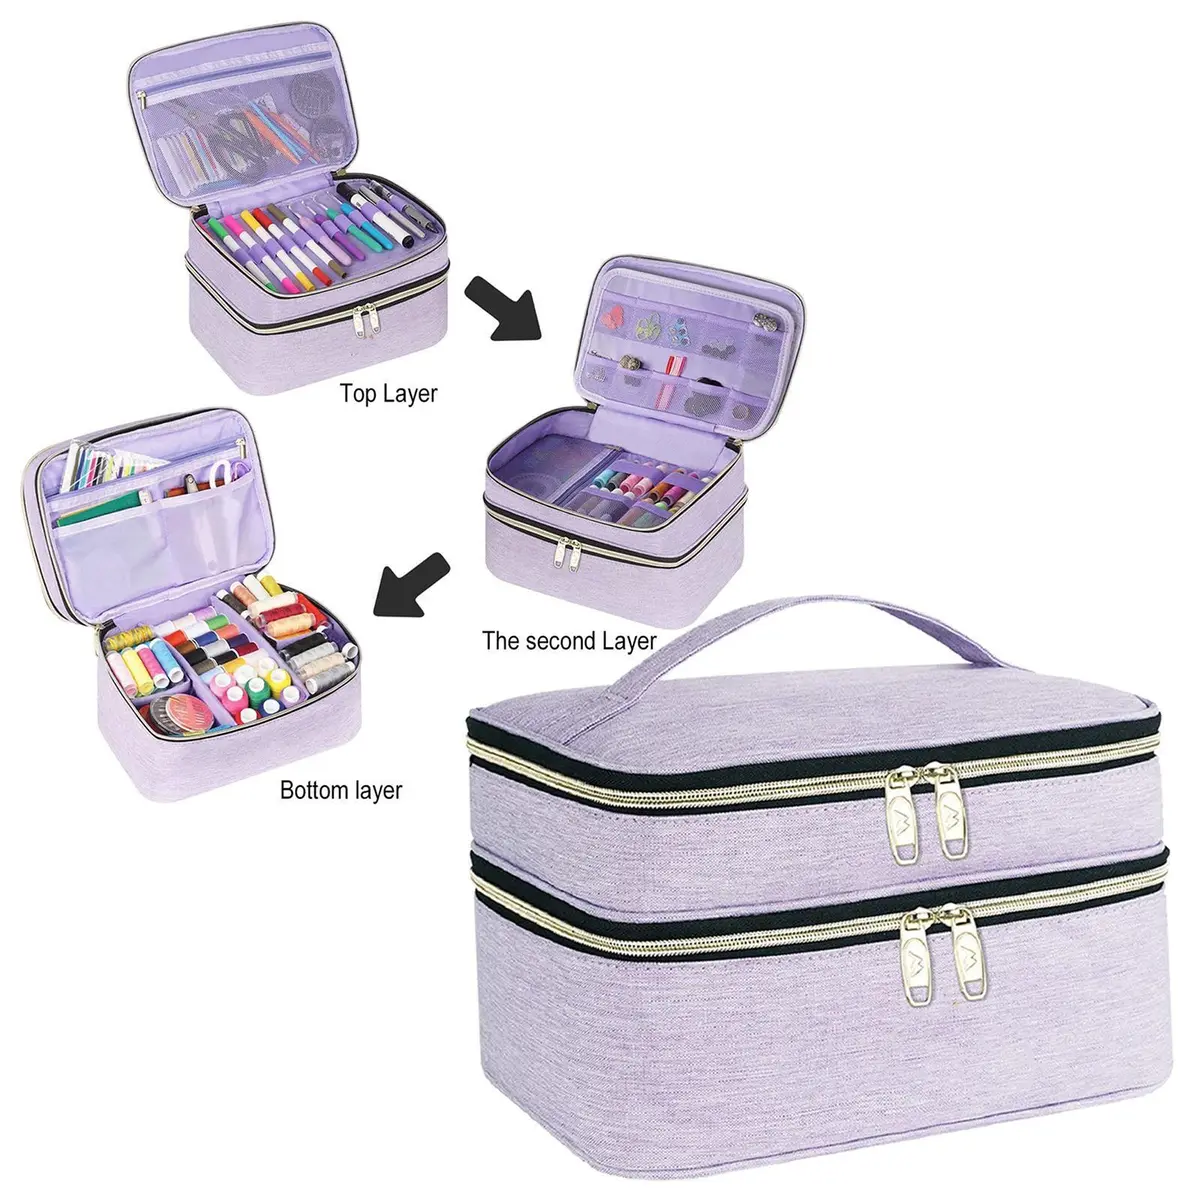 Sewing Supplies Storage Bag Double Layer Travel Sewing Box for